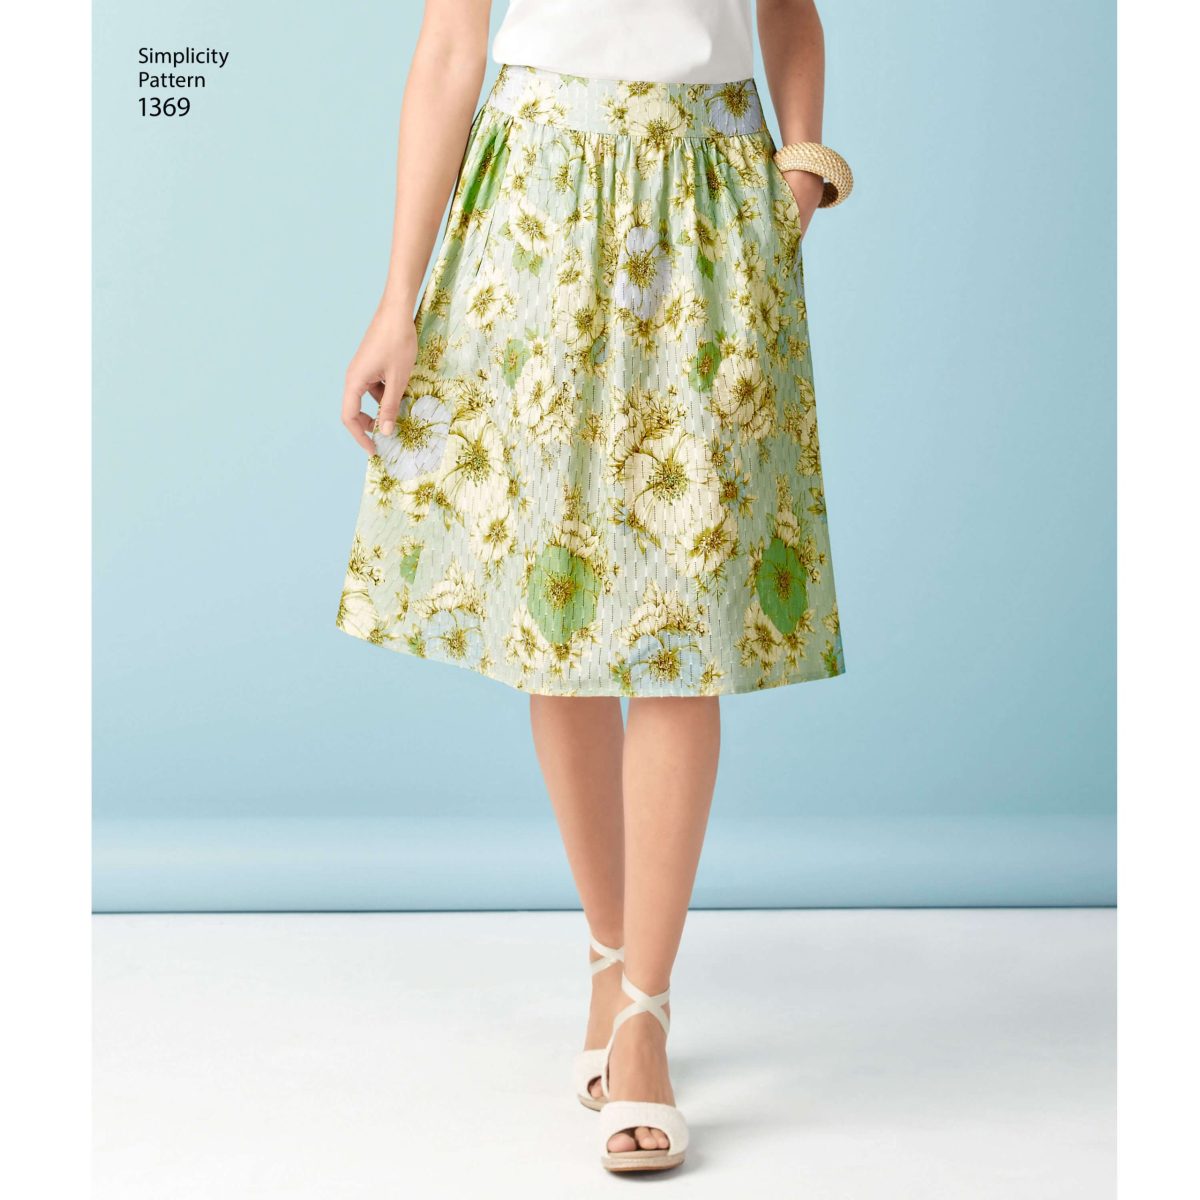 Simplicity Sewing Pattern 1369 Misses' Skirts in Three Lengths